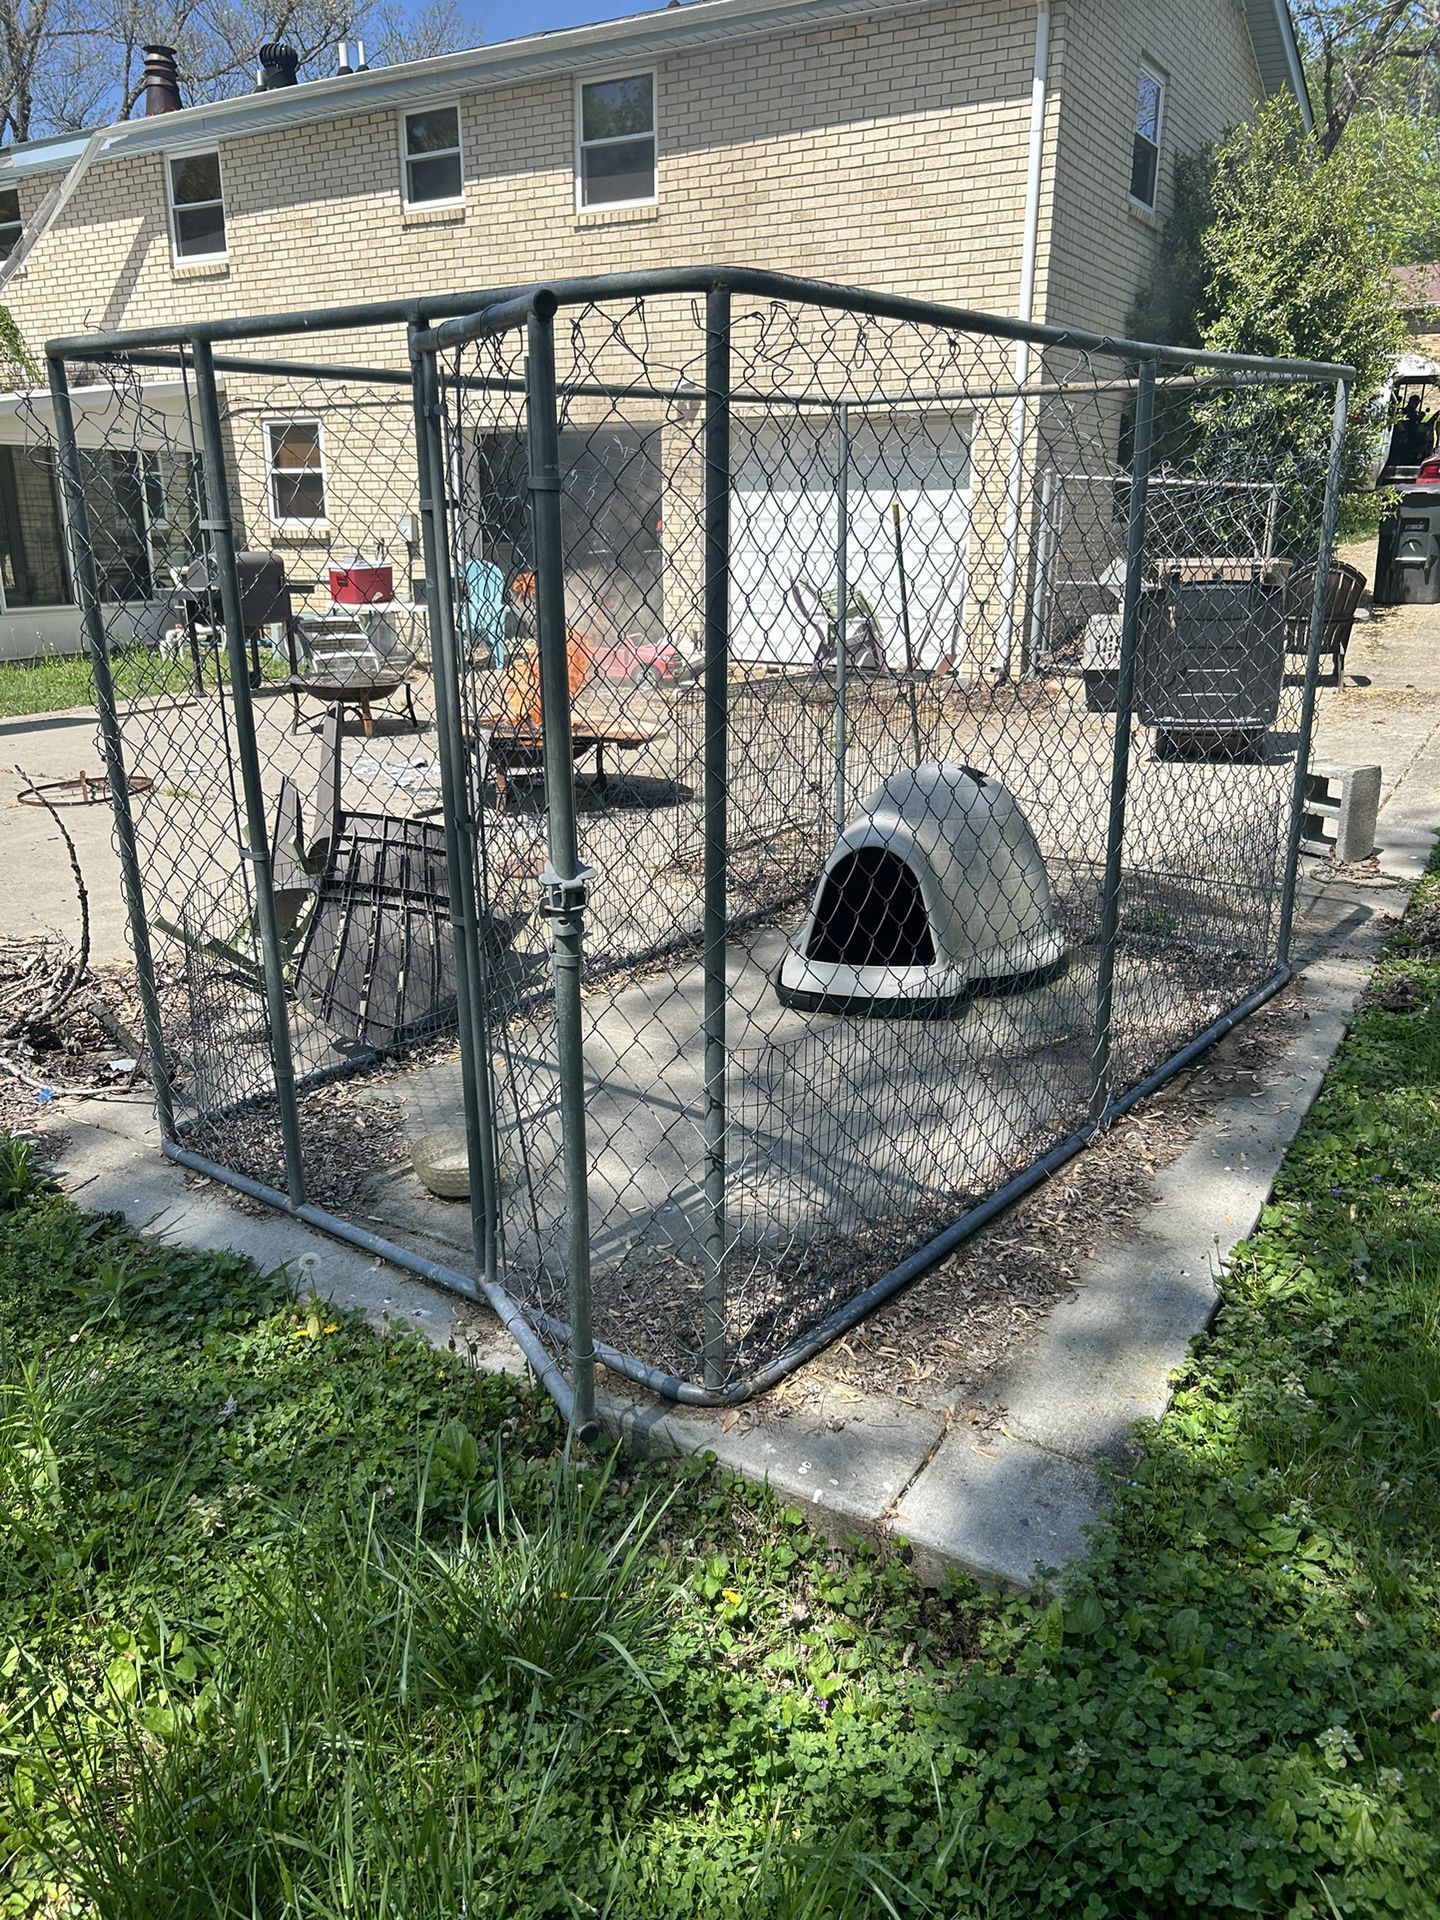 Doghouse And dog kennel